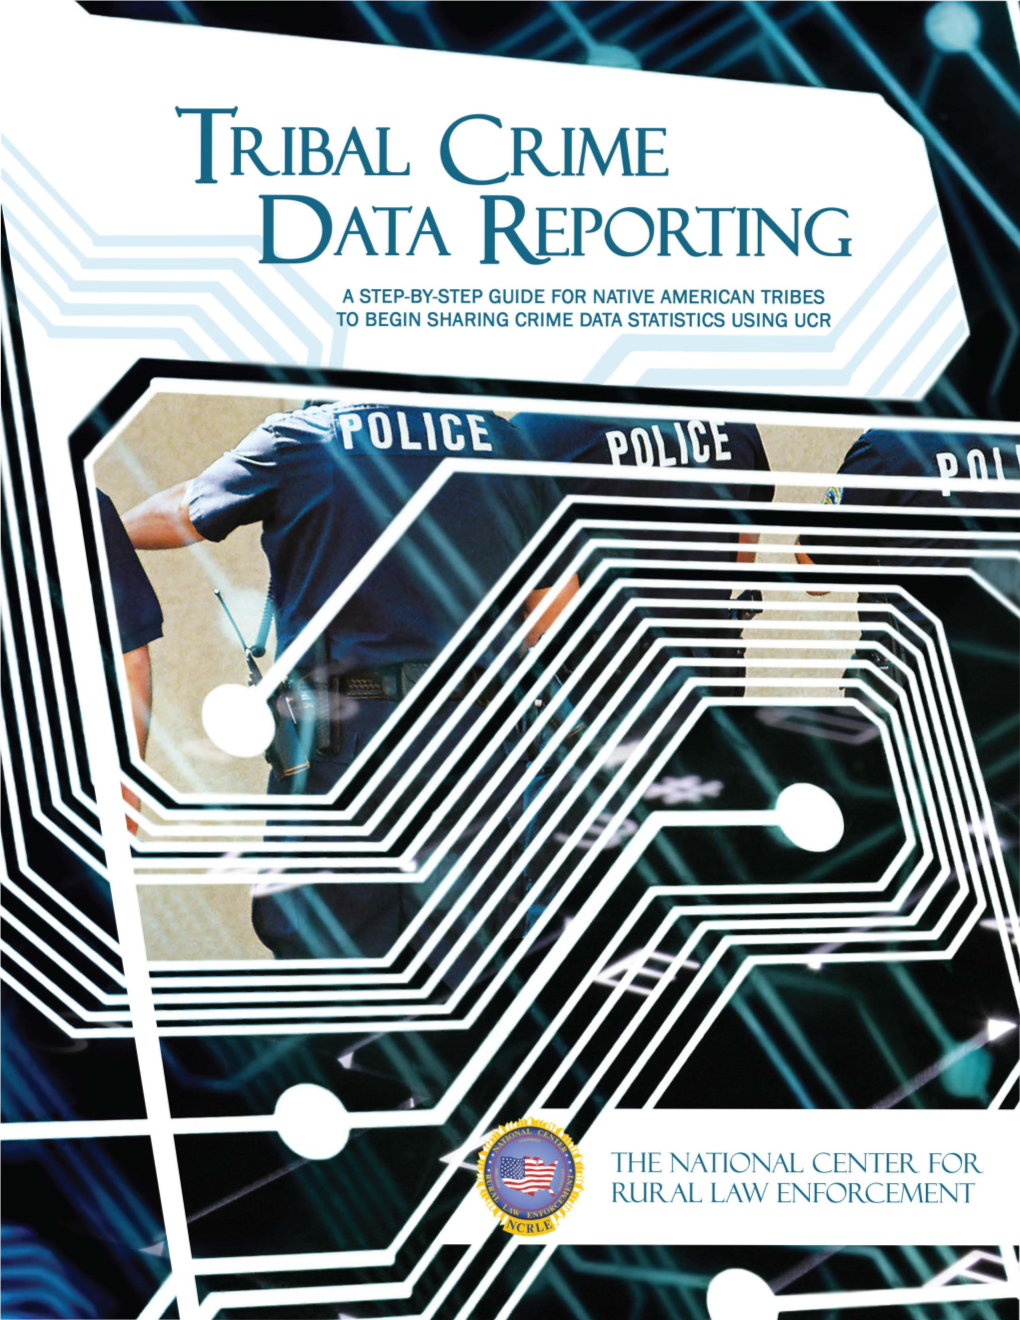 Tribal Crime Data Reporting a Step-By-Step Guide for Native American Tribes to Begin Sharing Crime Data Statistics Using Ucr